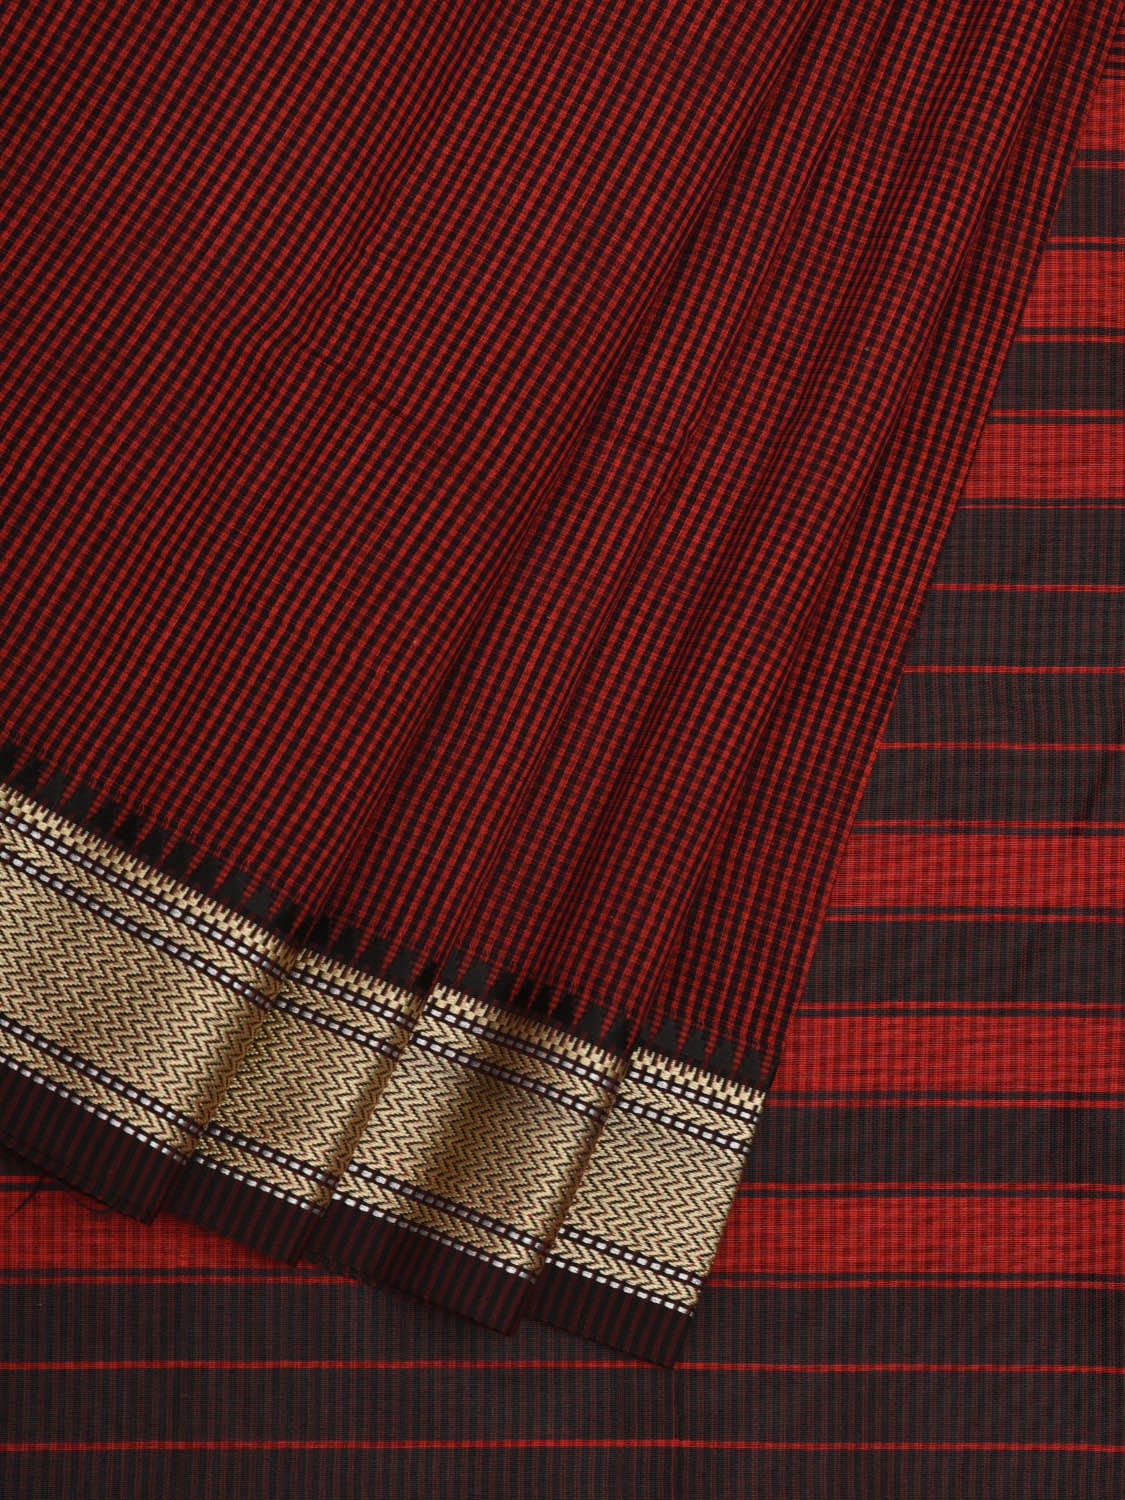 Small check boxes Pasapalli Cotton Saree without Blouse Piece online |  Handloom Sarees